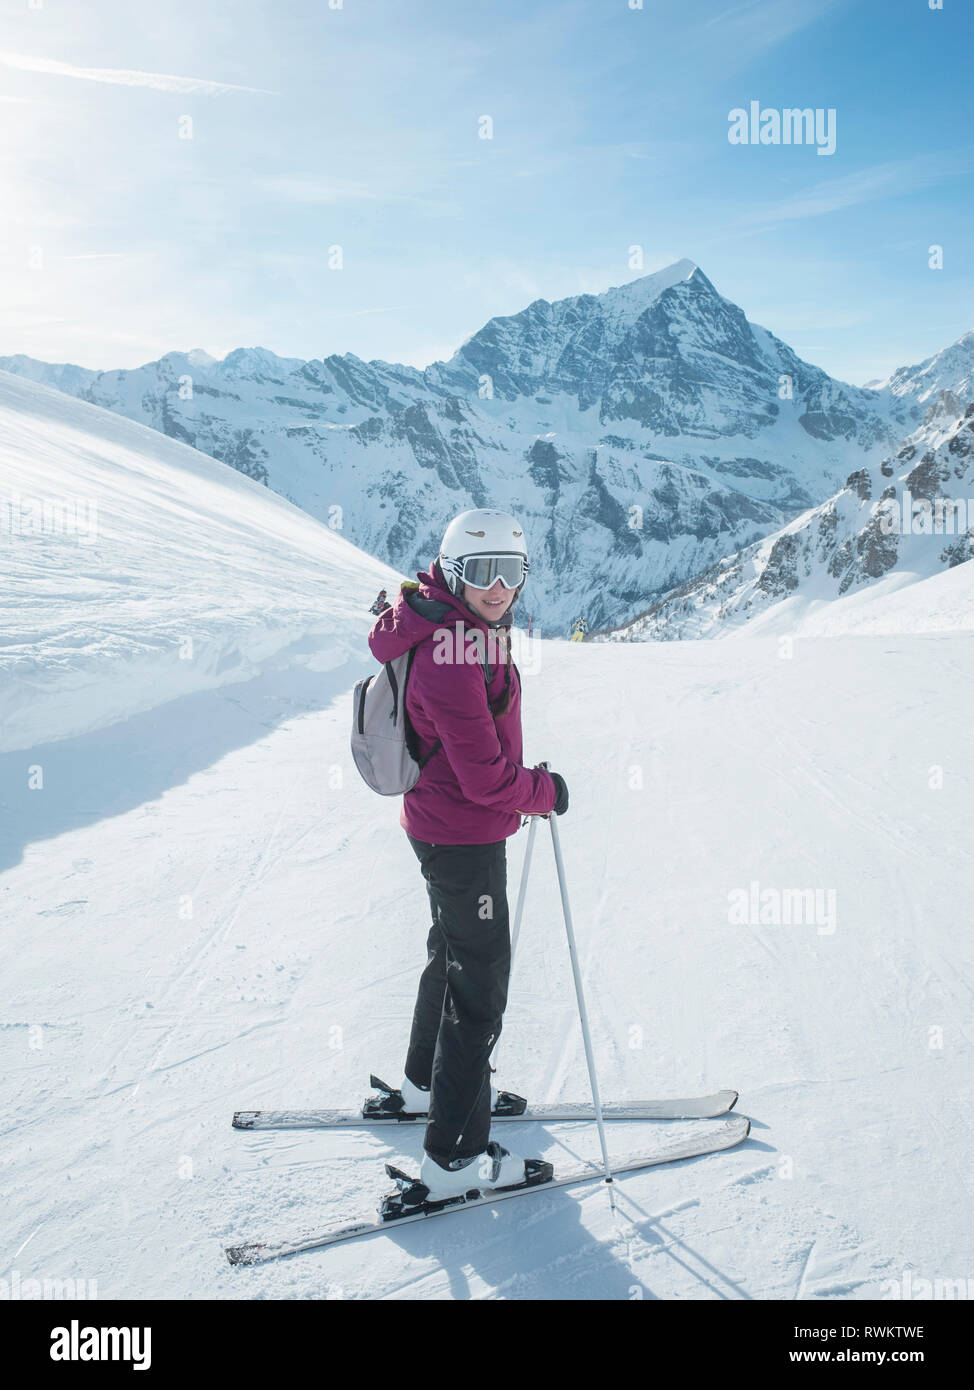 Young woman skier wearing helmet and ski goggles looking back in snow covered landscape,  Alpe Ciamporino, Piemonte, Italy Stock Photo